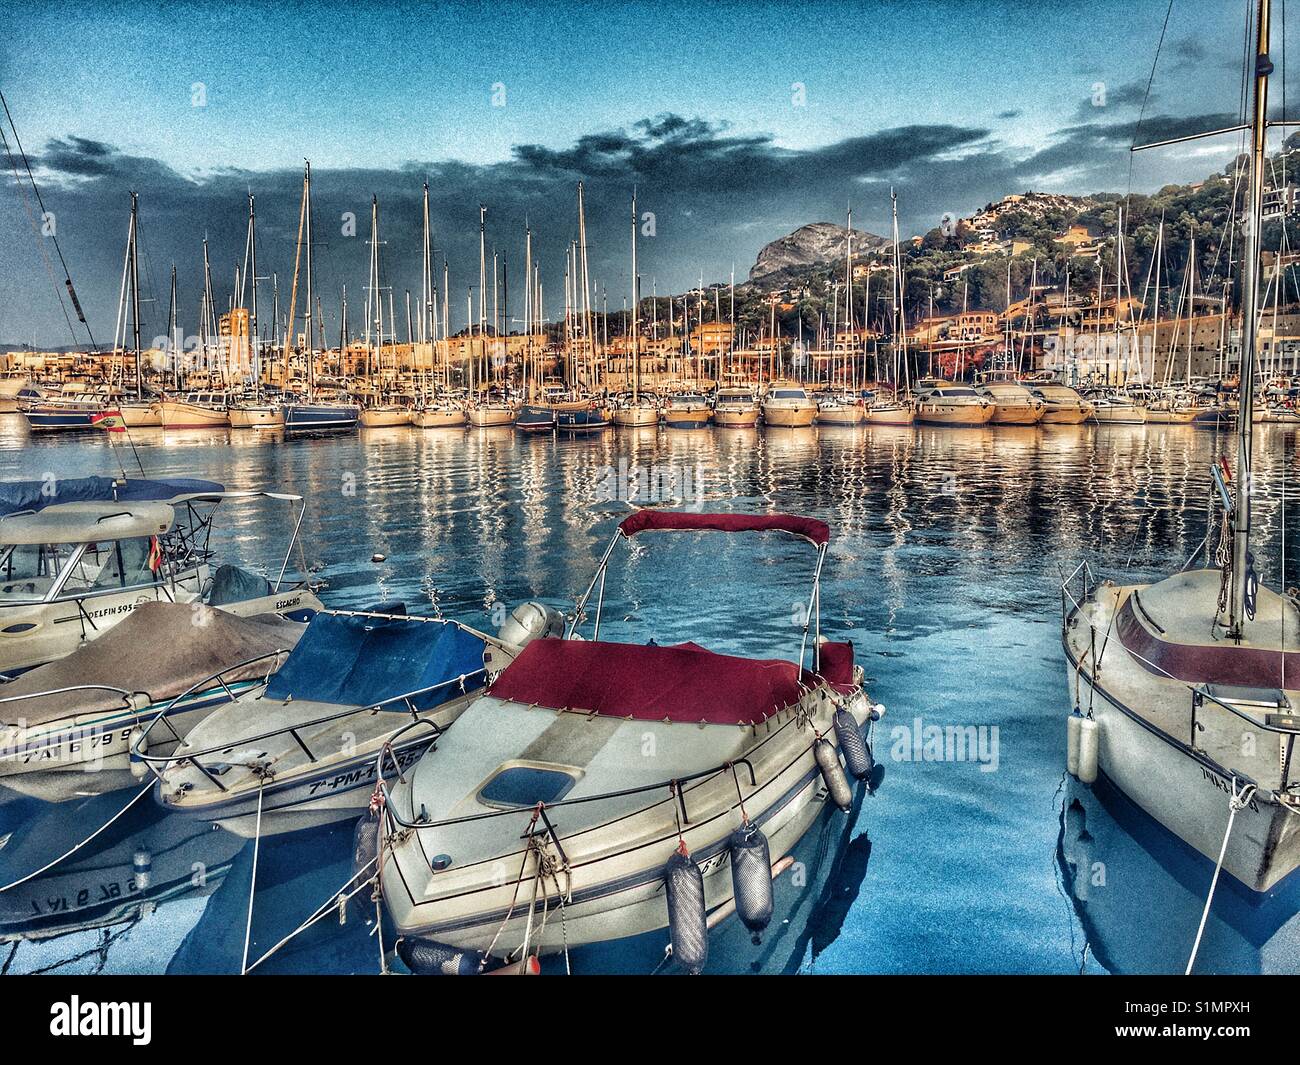 View over the yacht club towards the fishing boats, Montgo mountain and port of Javea, Alicante, Spain Stock Photo